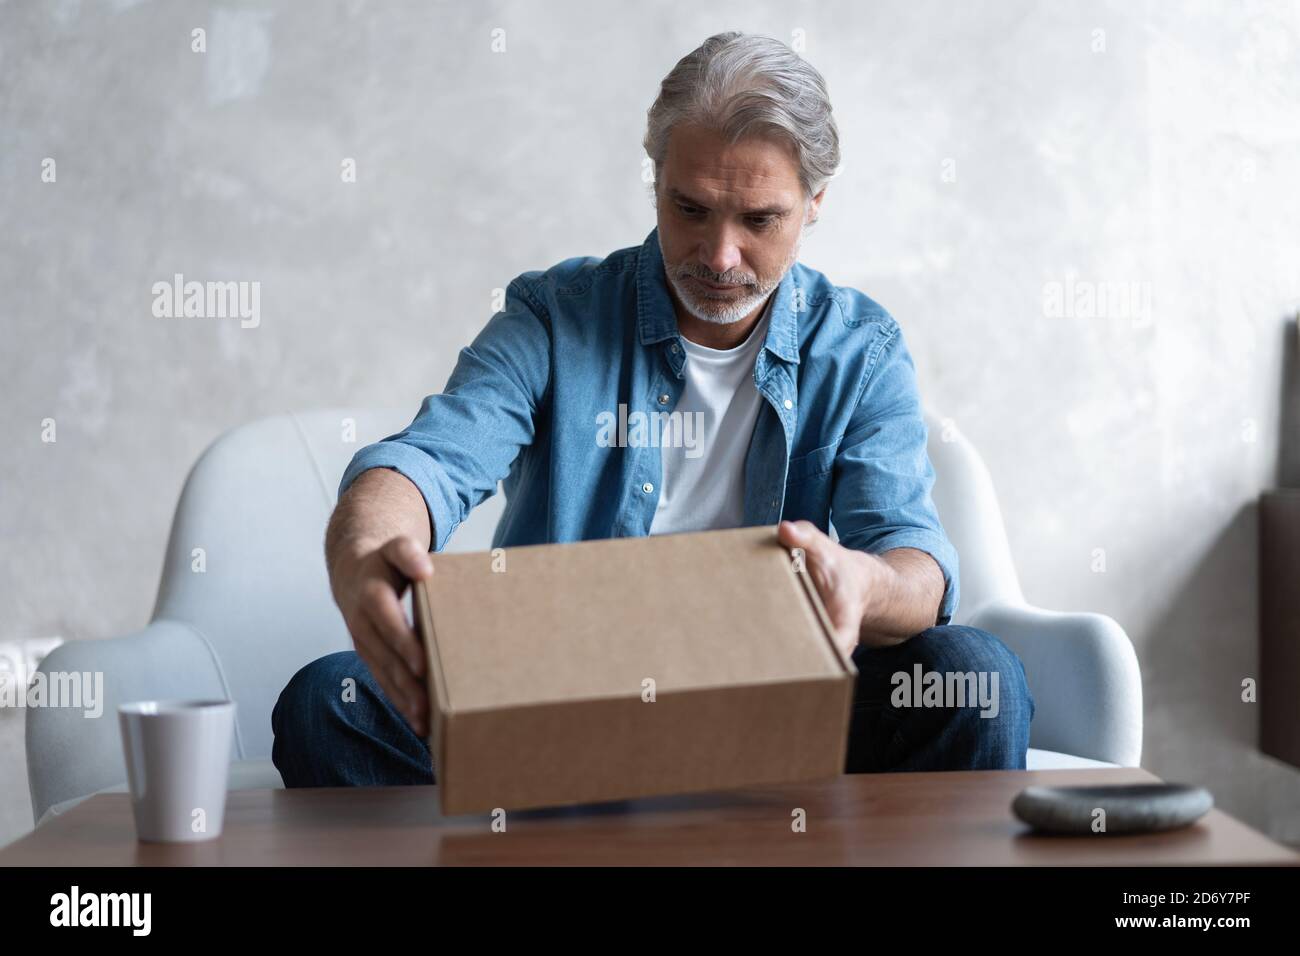 Smiling man consumer open cardboard box get postal parcel, male customer receive carton package sit on sofa at home Stock Photo